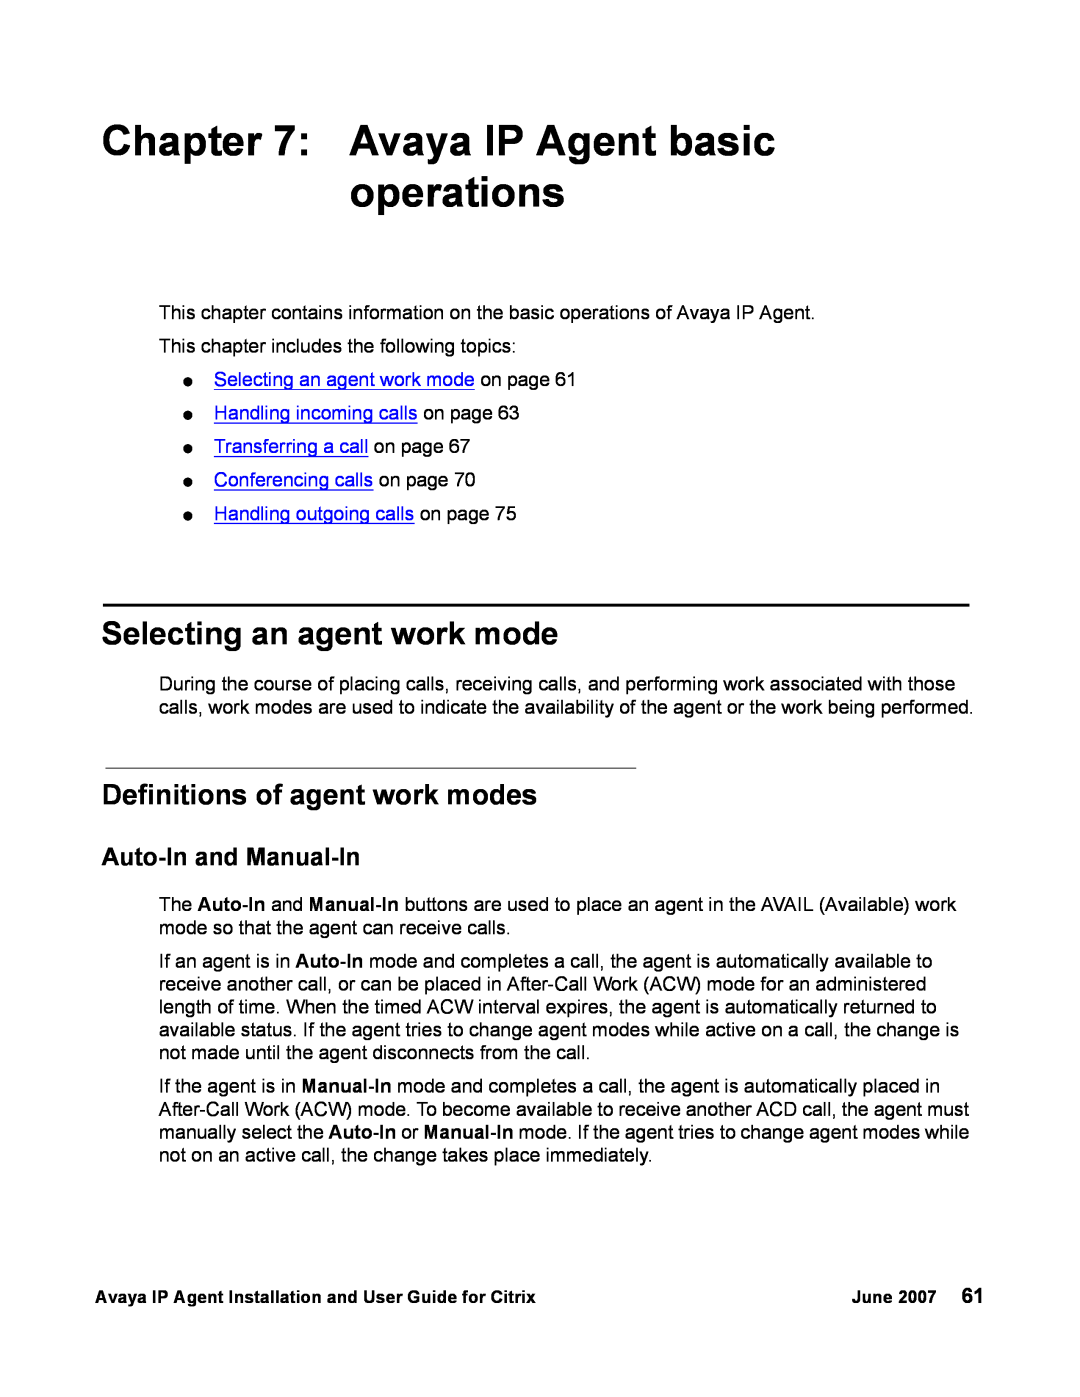 Avaya 7 manual Avaya IP Agent basic operations, Selecting an agent work mode, Definitions of agent work modes 